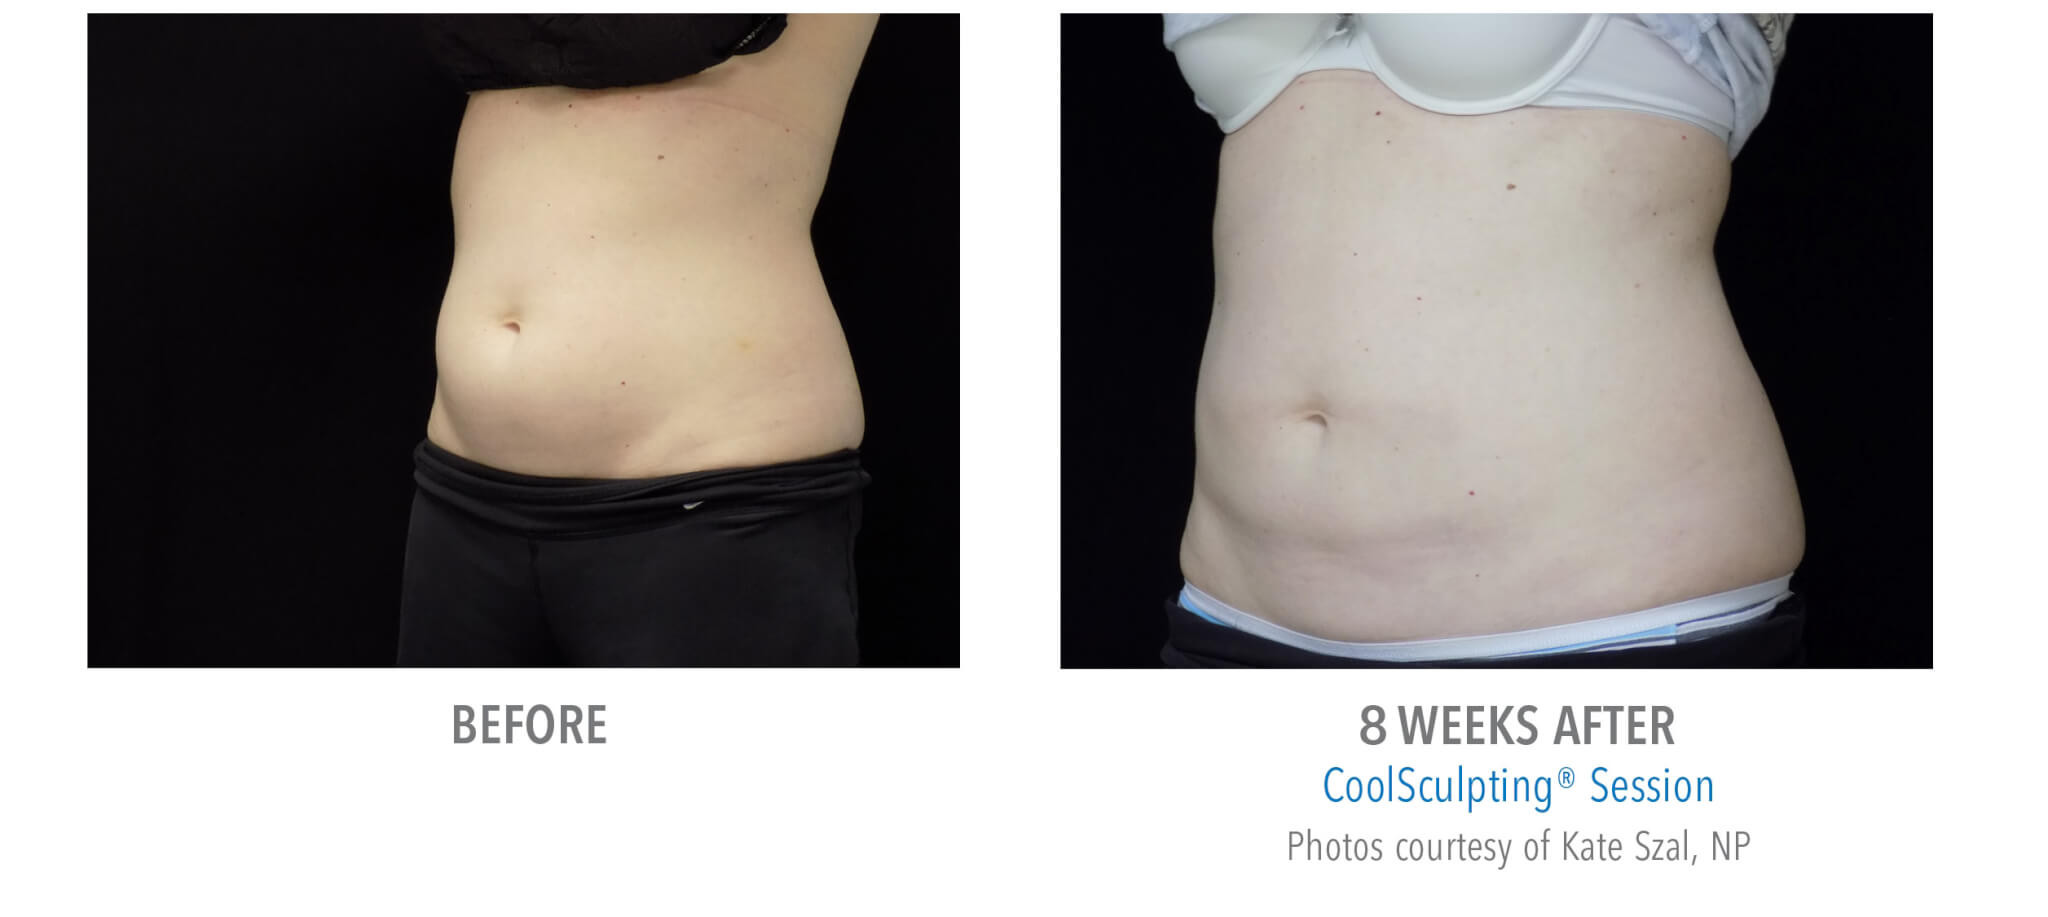 CS8 coolsculpting patient before and after